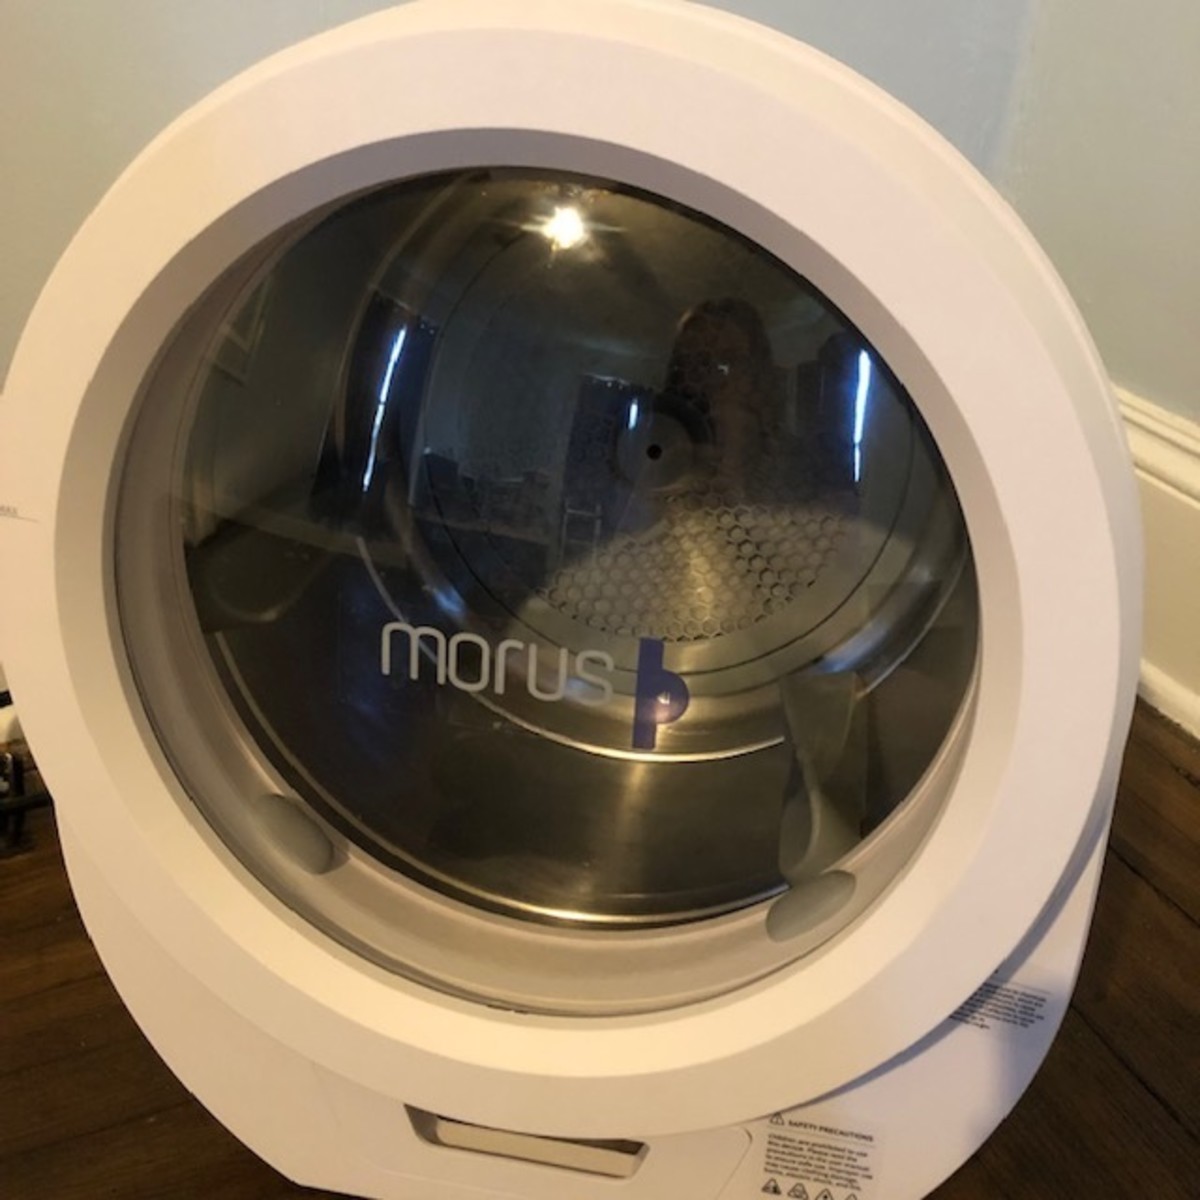 Morus Portable Dryer Machine Review for Clothes: Not Just For